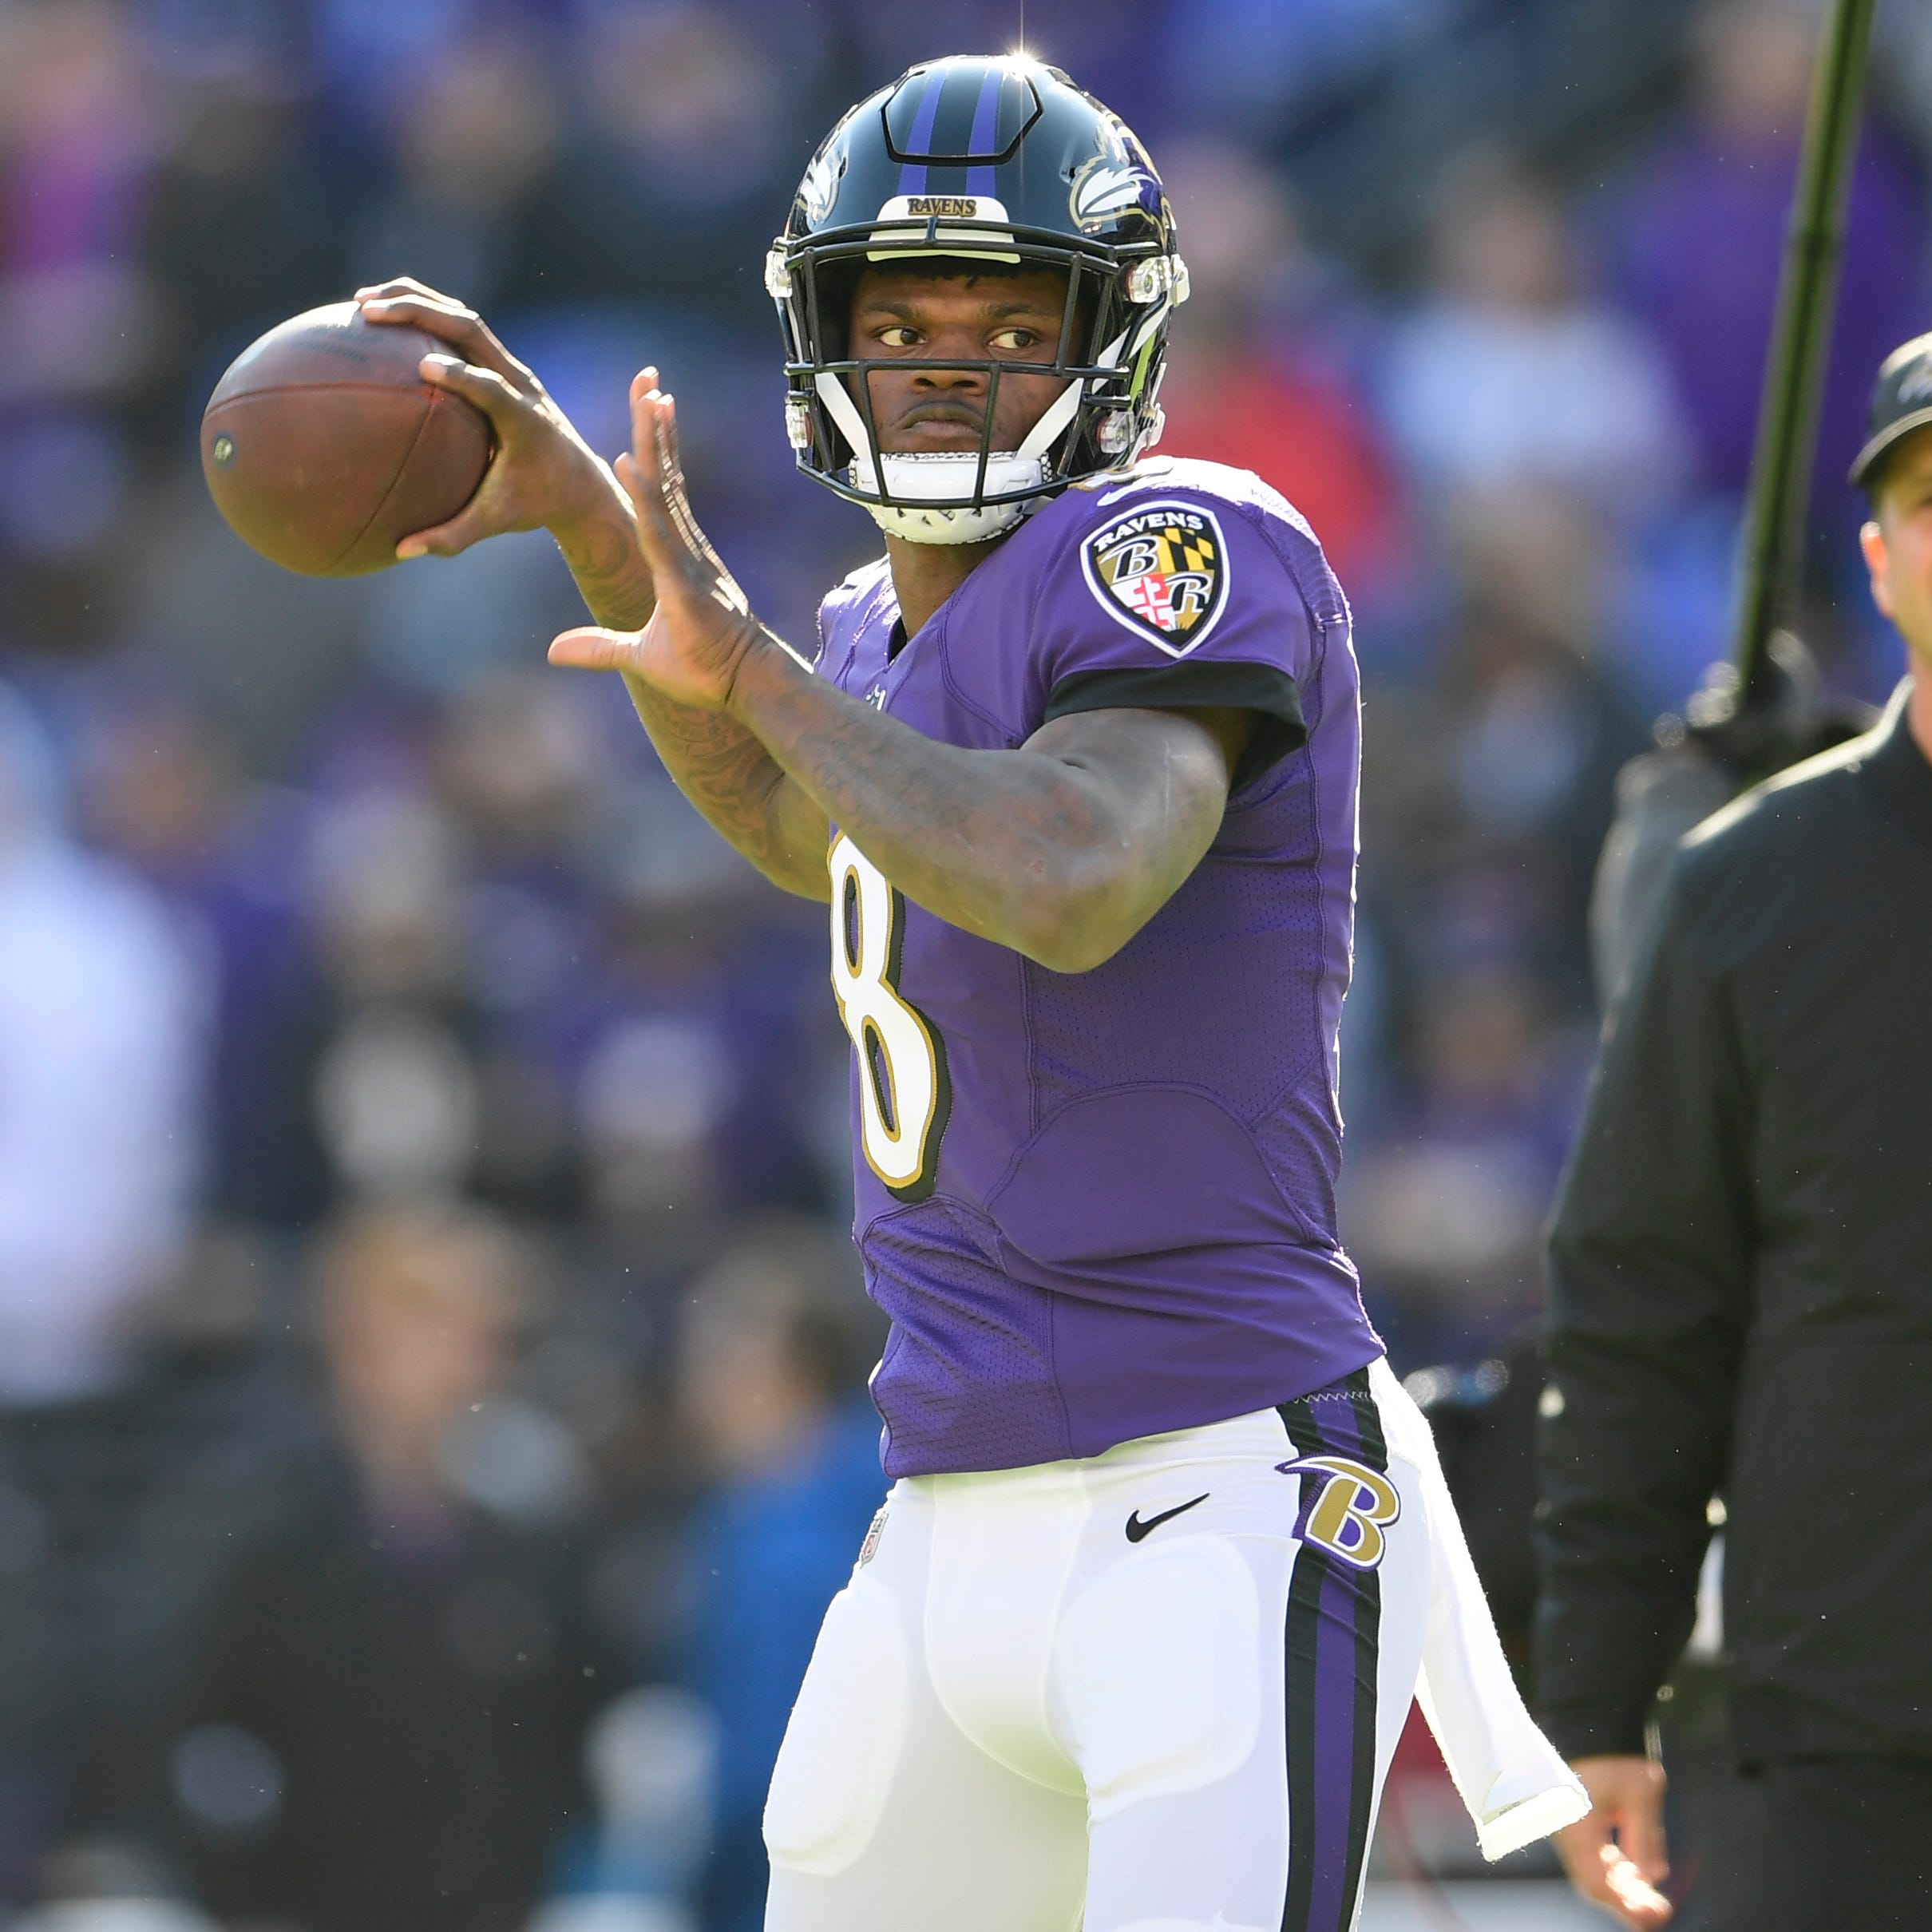 Baltimore Ravens quarterback Lamar Jackson (8) passes as head coach John Harbaugh looks prior to the game against the Los Angeles Chargers in a AFC Wild Card playoff football game at M&T Bank Stadium.